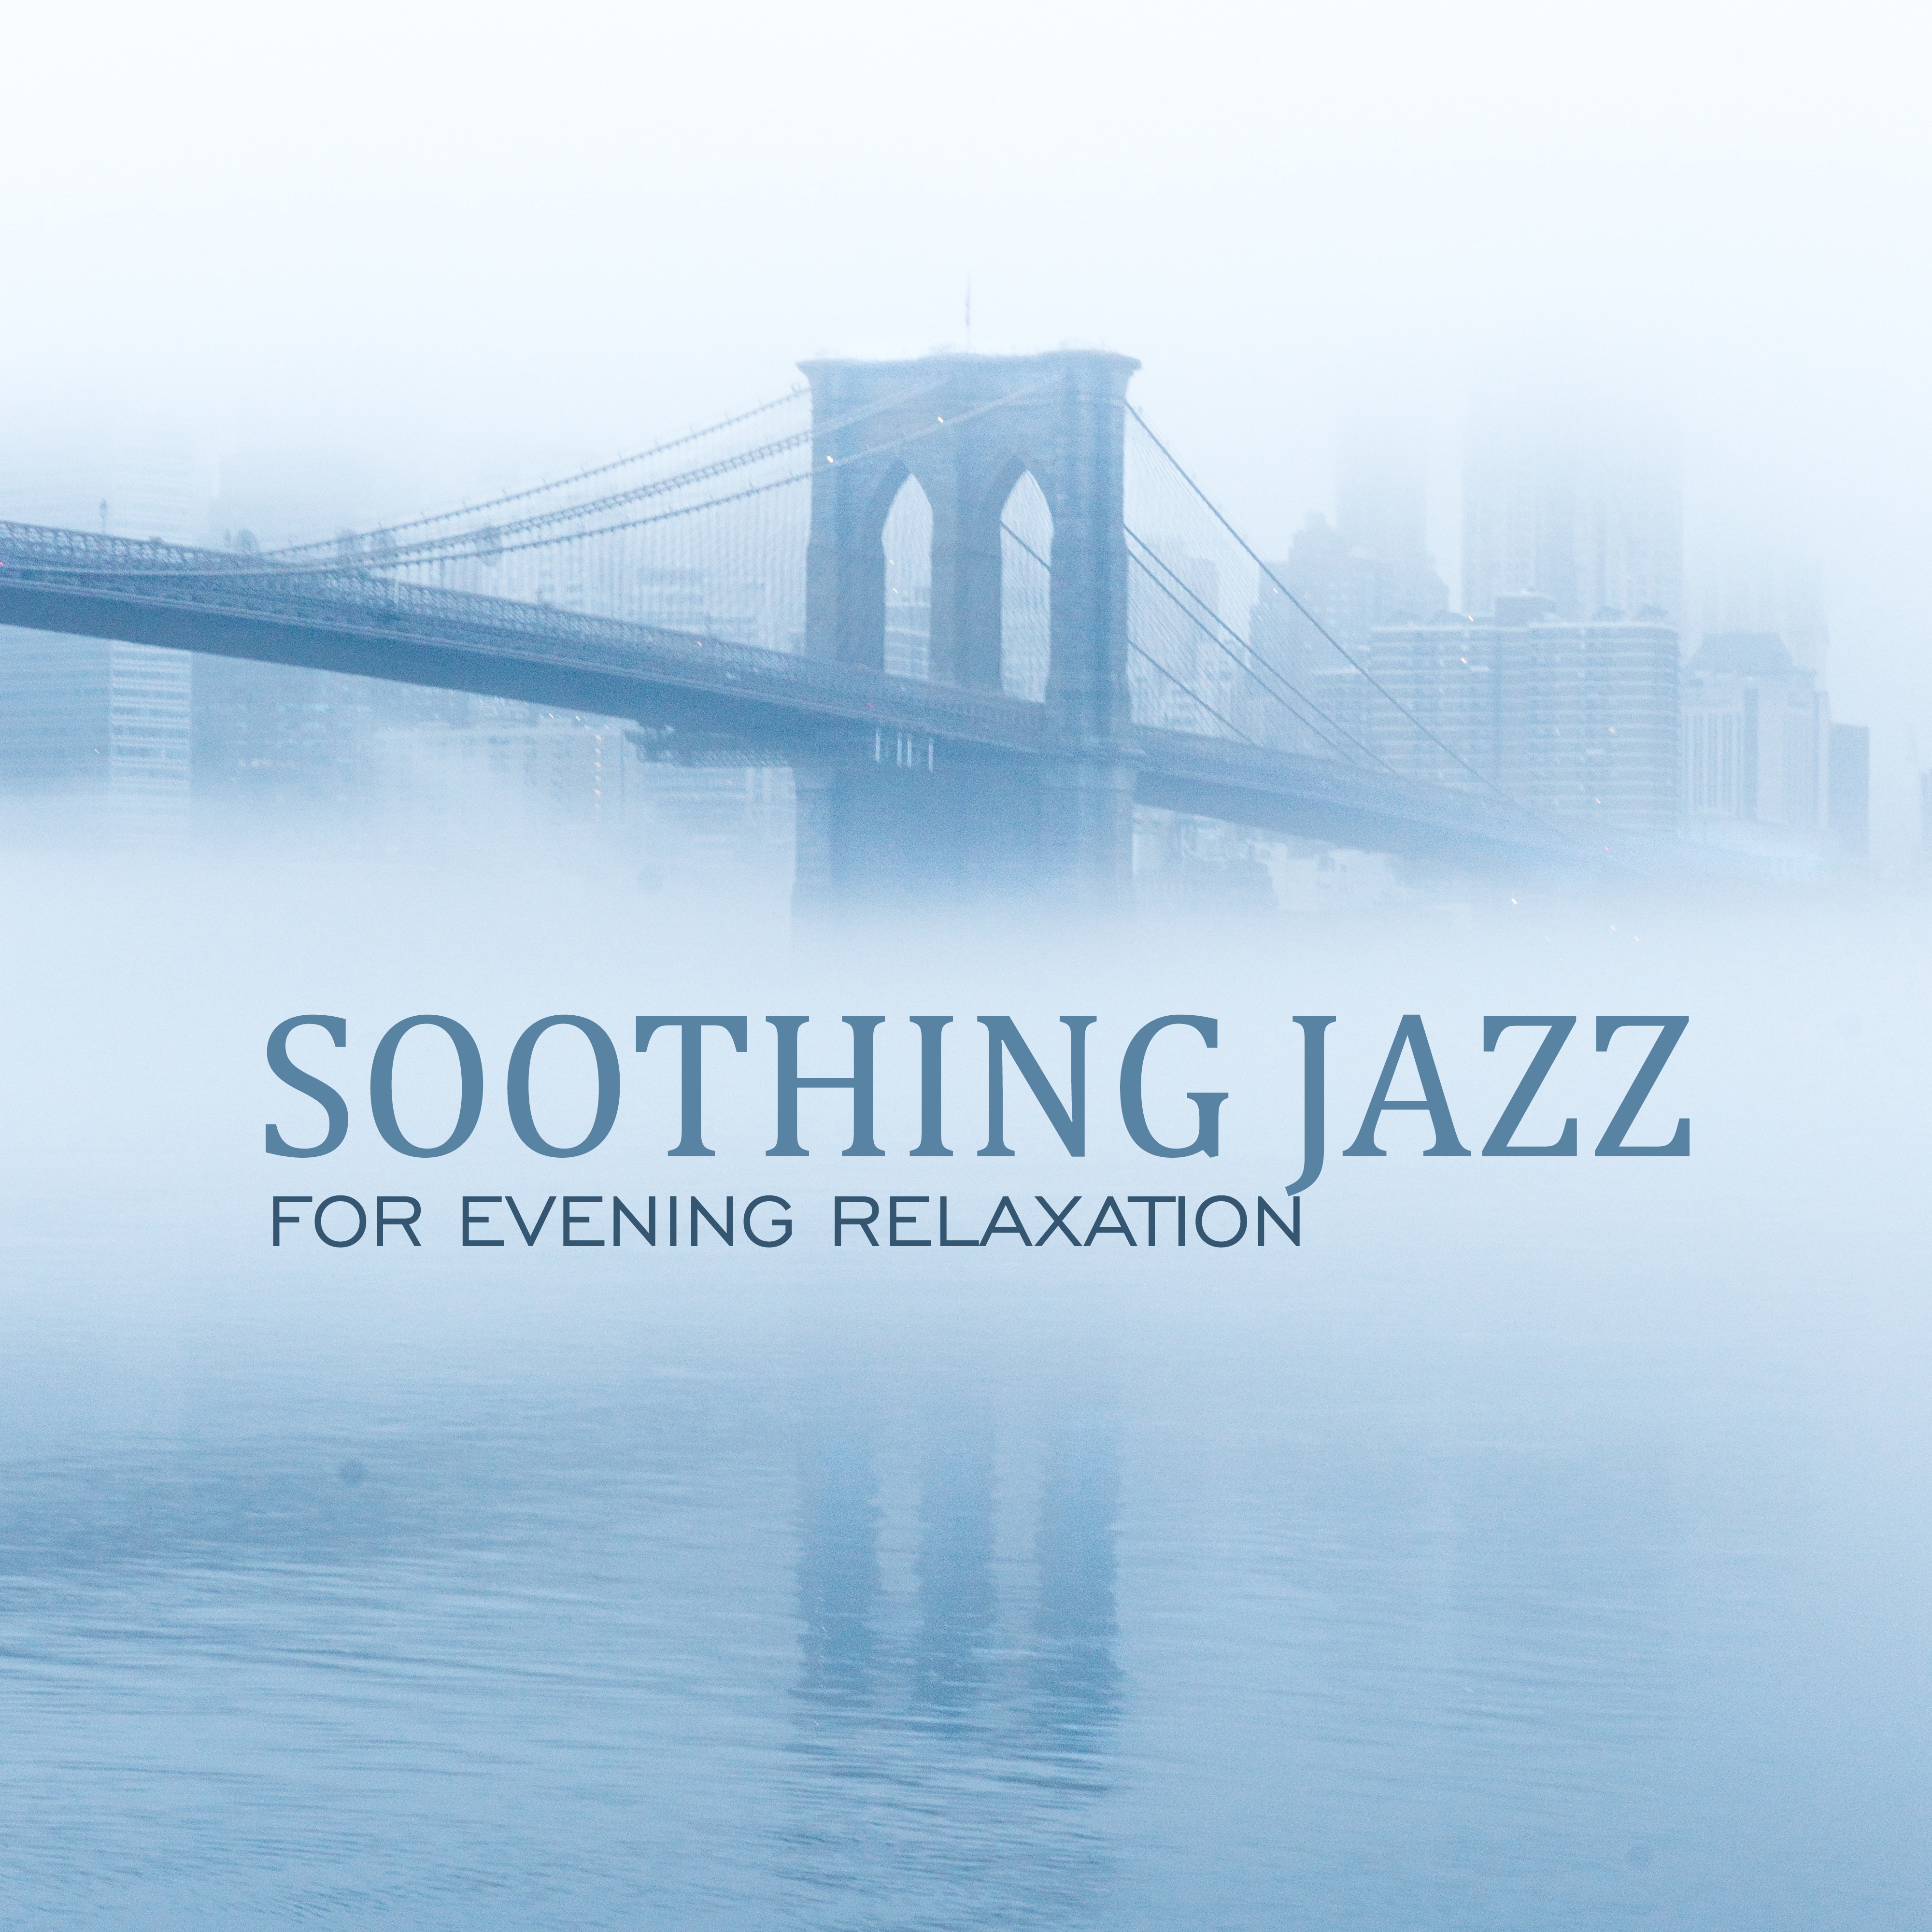 Soothing Jazz for Evening Relaxation